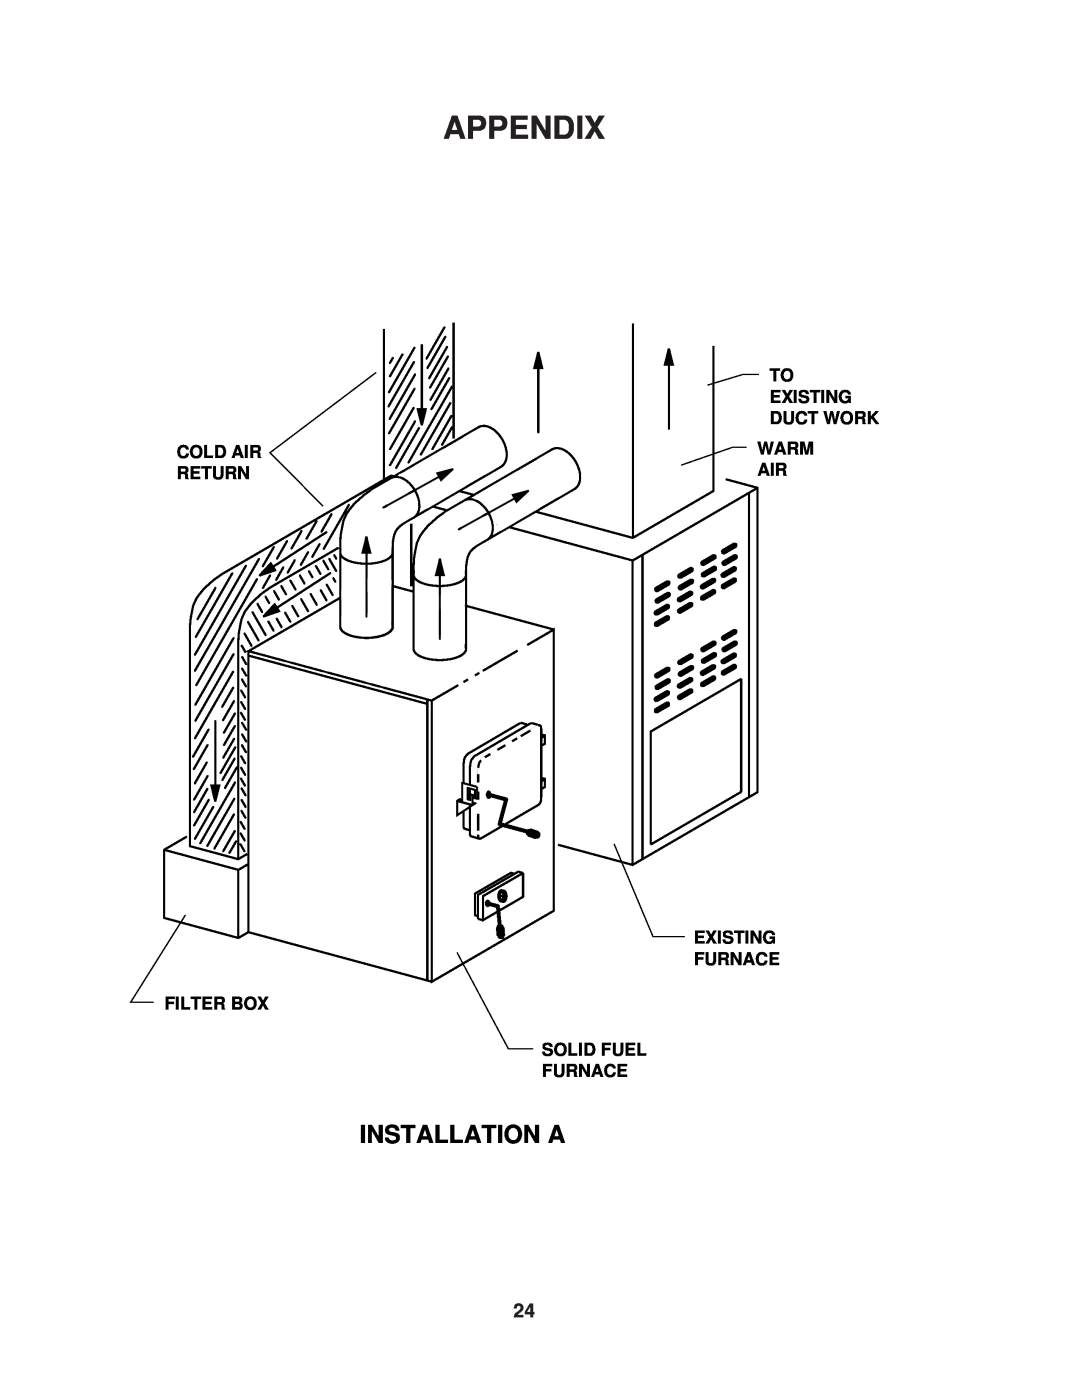 United States Stove 1537Q owner manual Appendix, Installation A, Cold Air Return Filter Box, Solid Fuel Furnace 